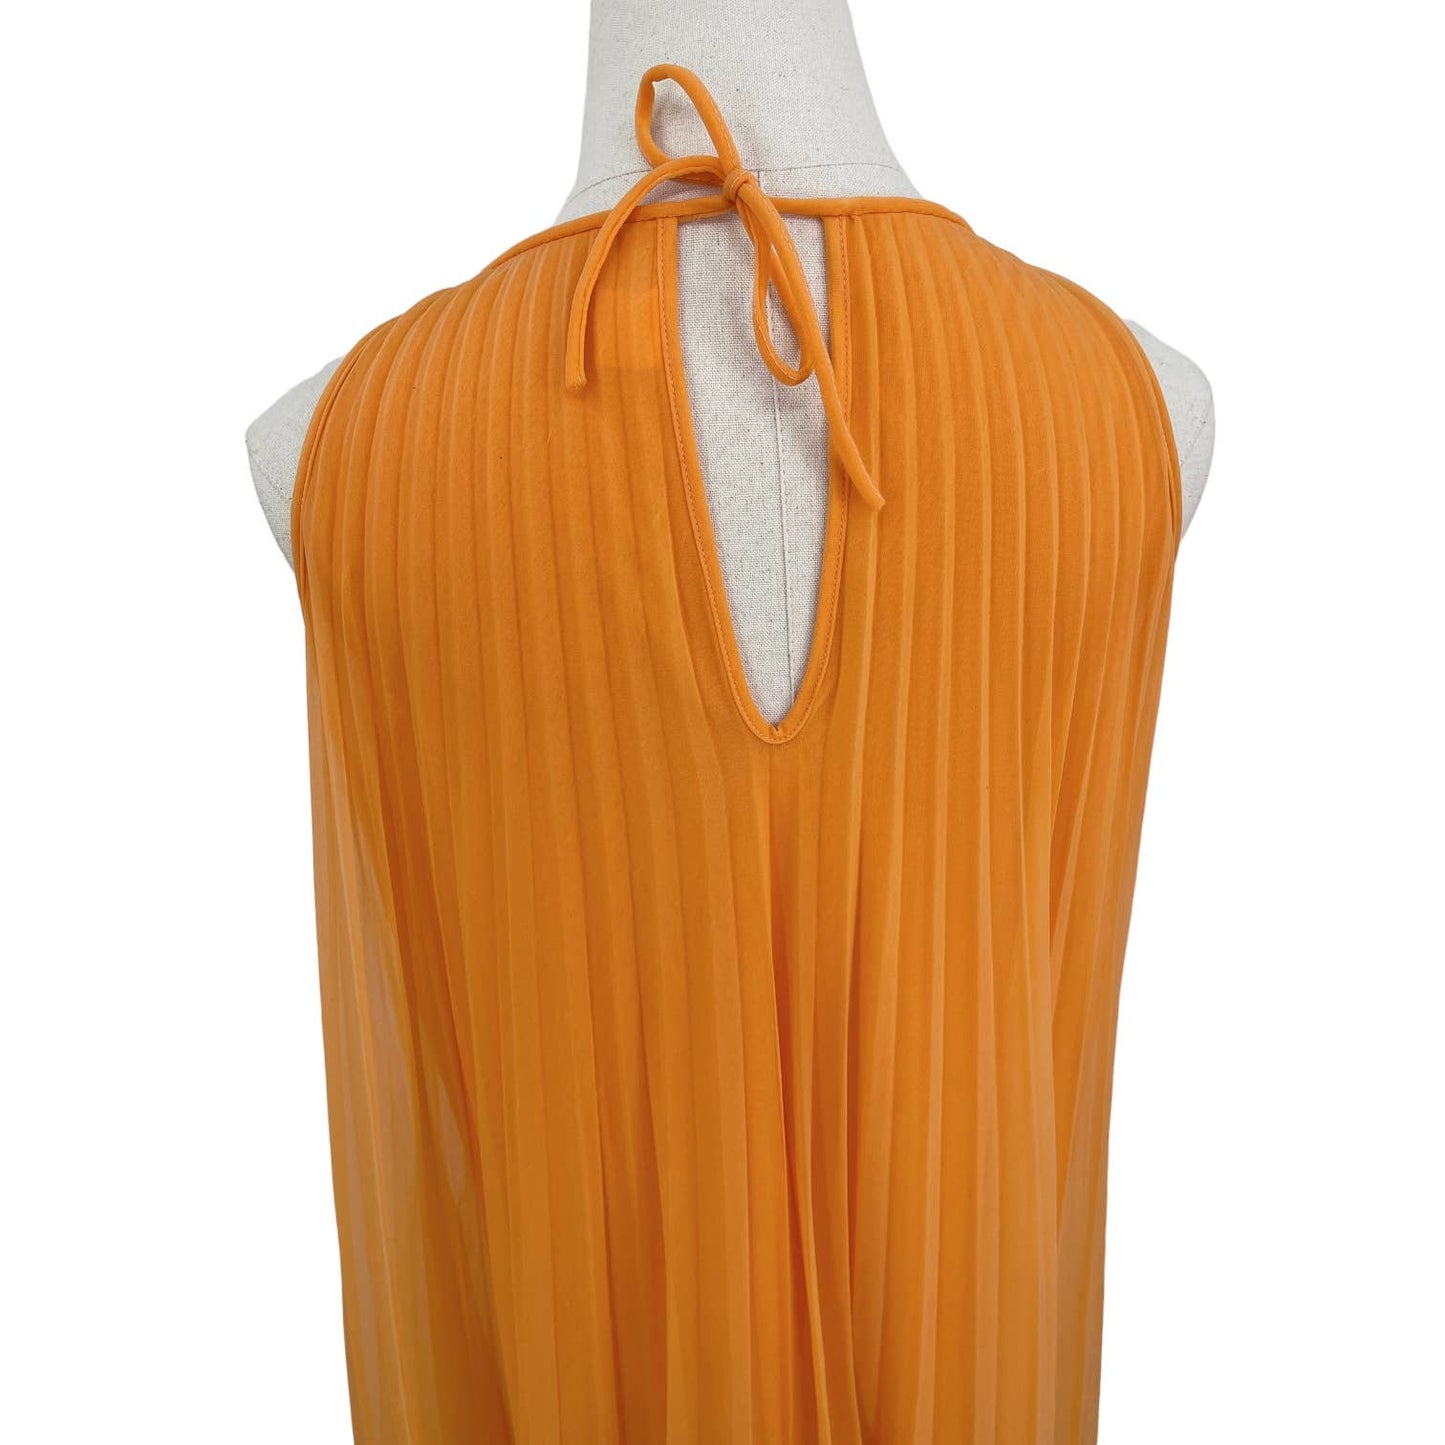 Vintage 60s Orange Pleated Babydoll Nightgown Tent Style Sleeveless Sears S M